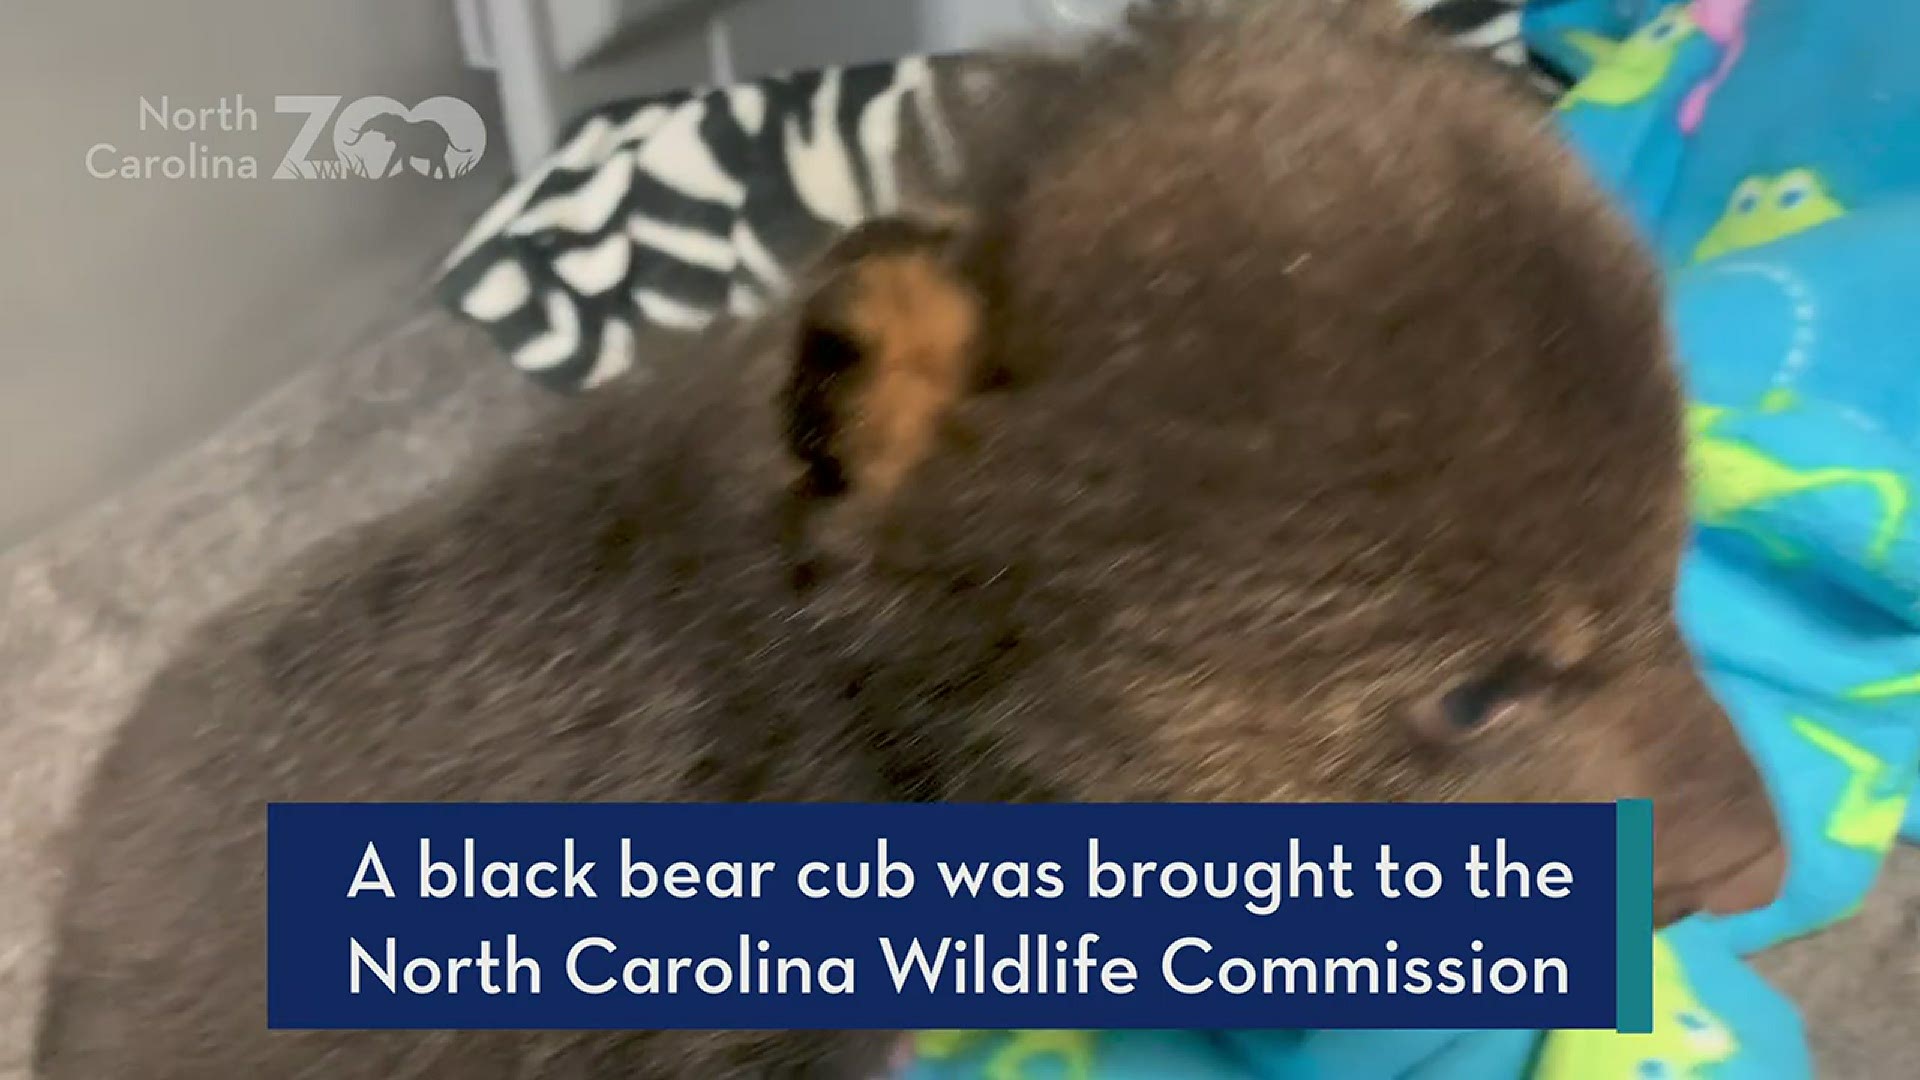 This black bear cub was brought to the North Carolina Zoo VHS Wildlife Rehab Center from the North Carolina Wildlife Resources Commission.